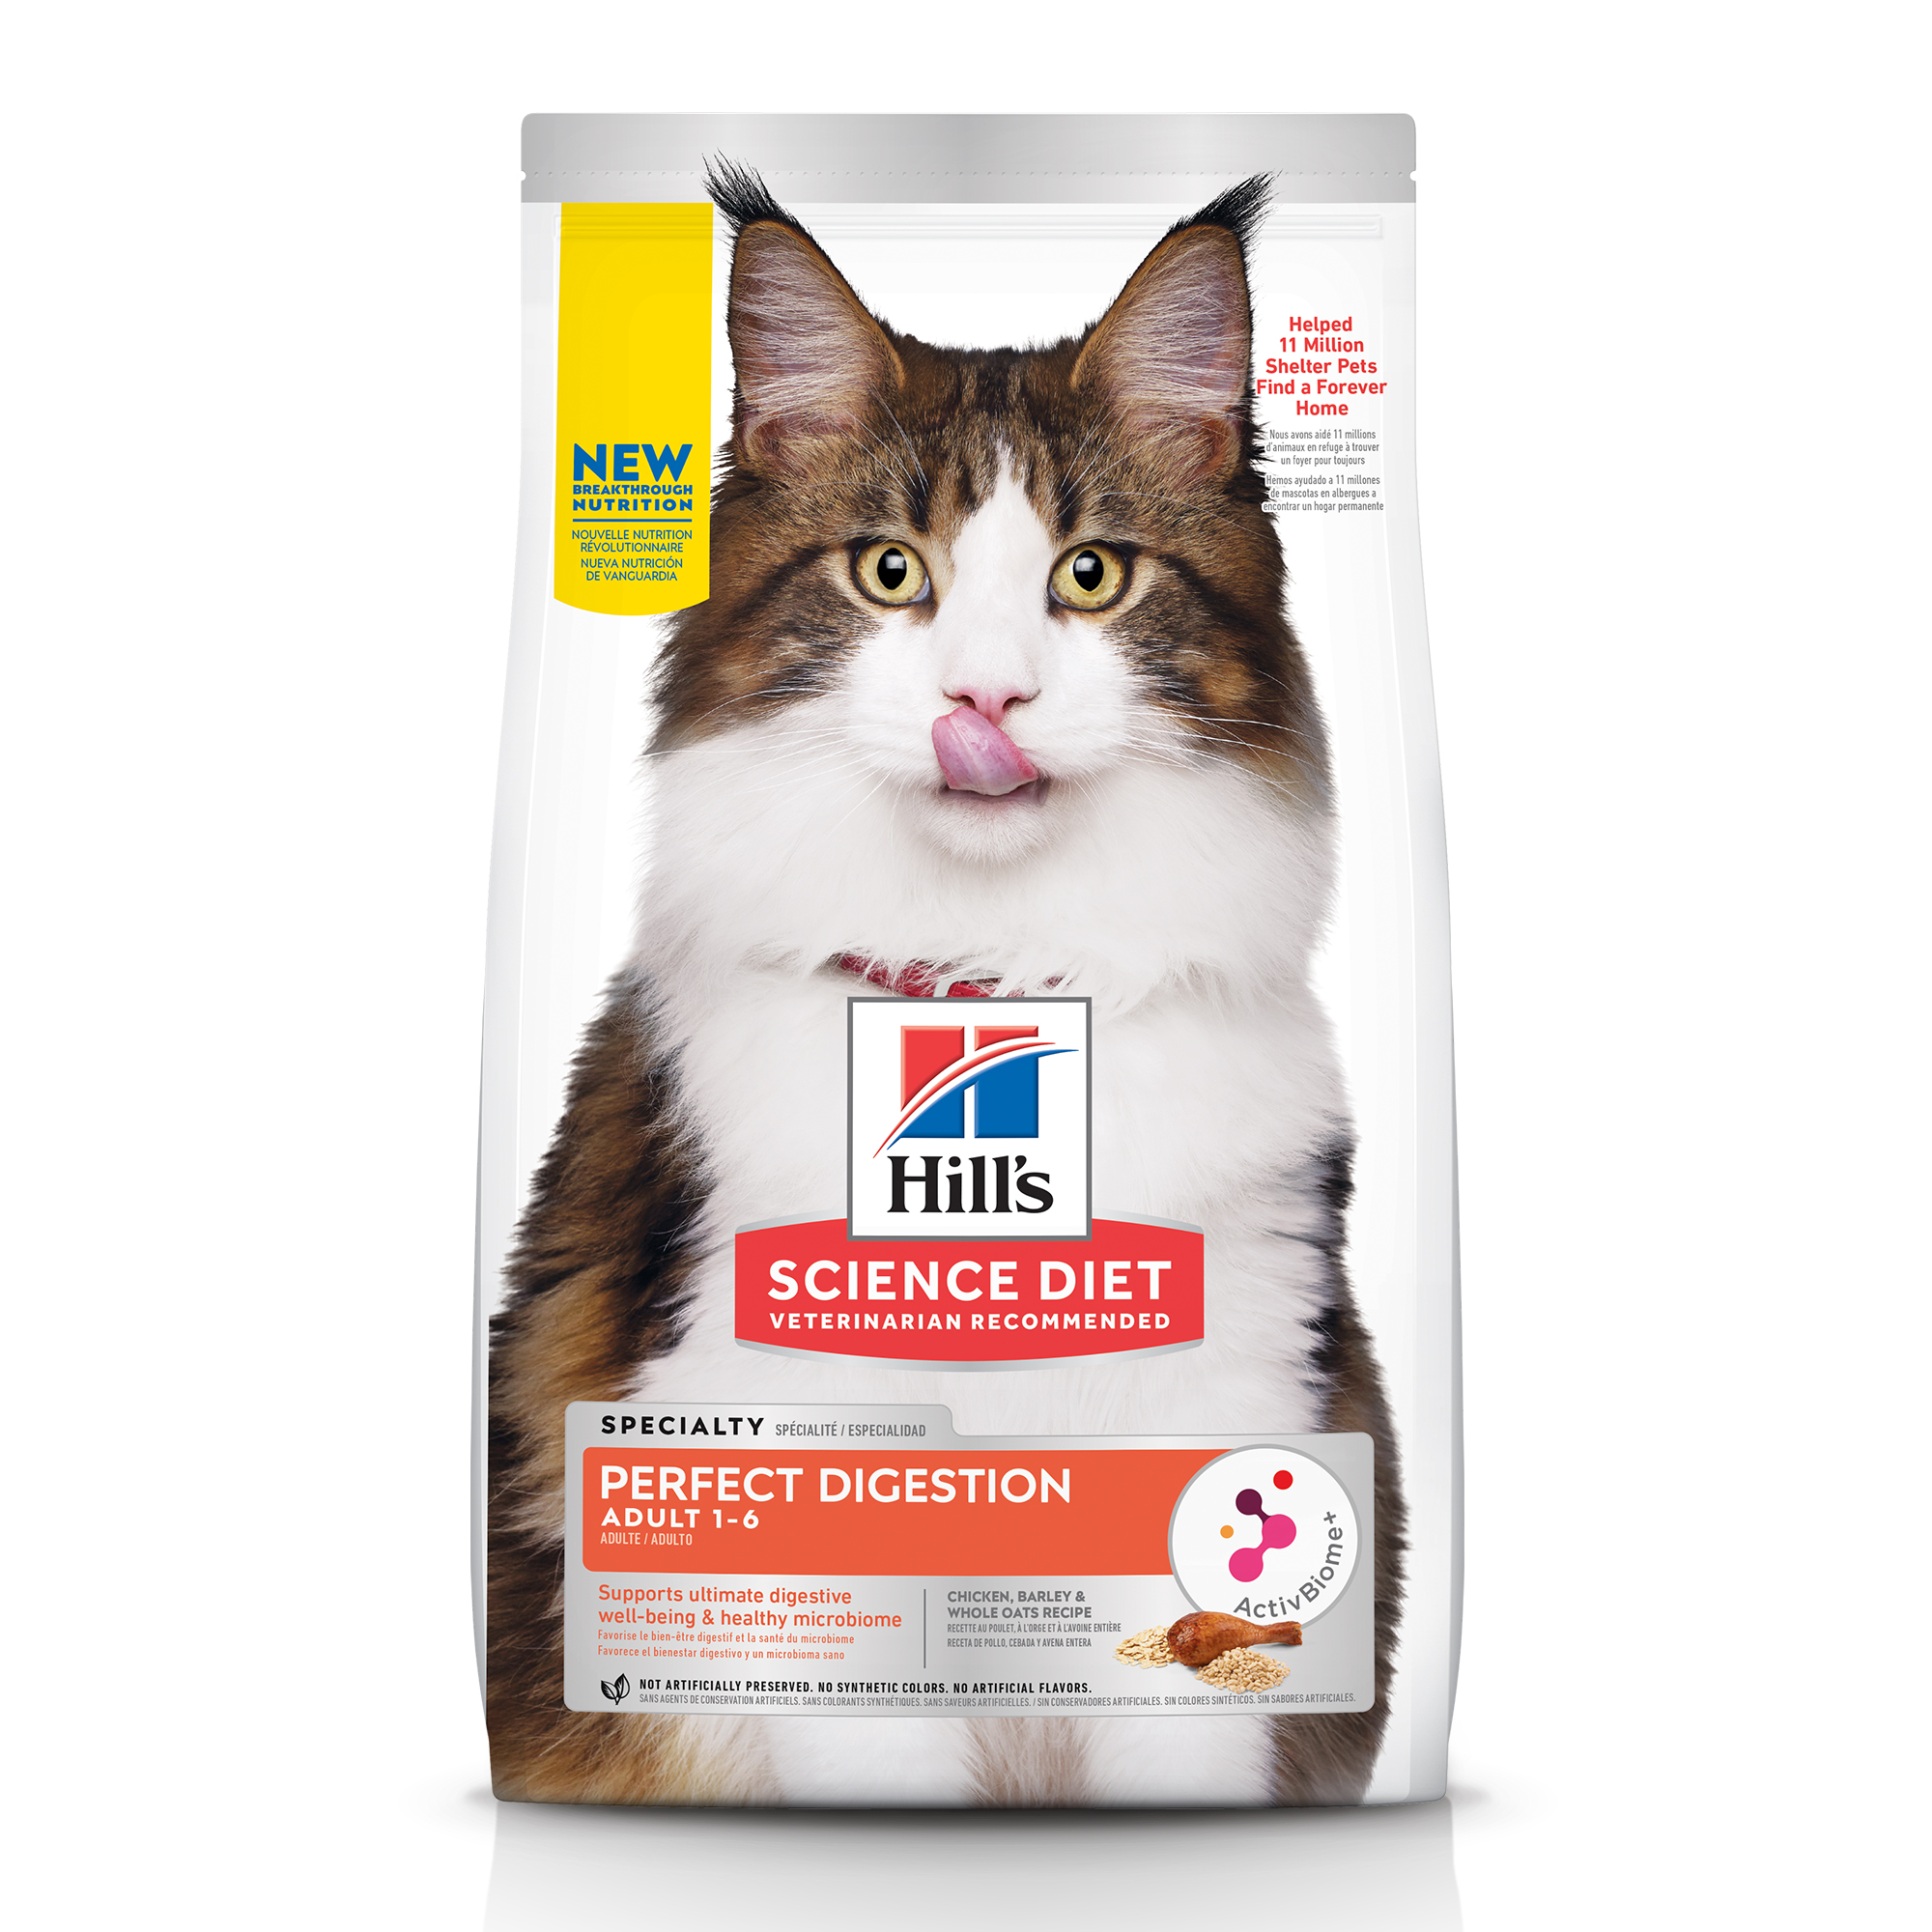 Feline adult specialty perfect digestion 1.58 kg 